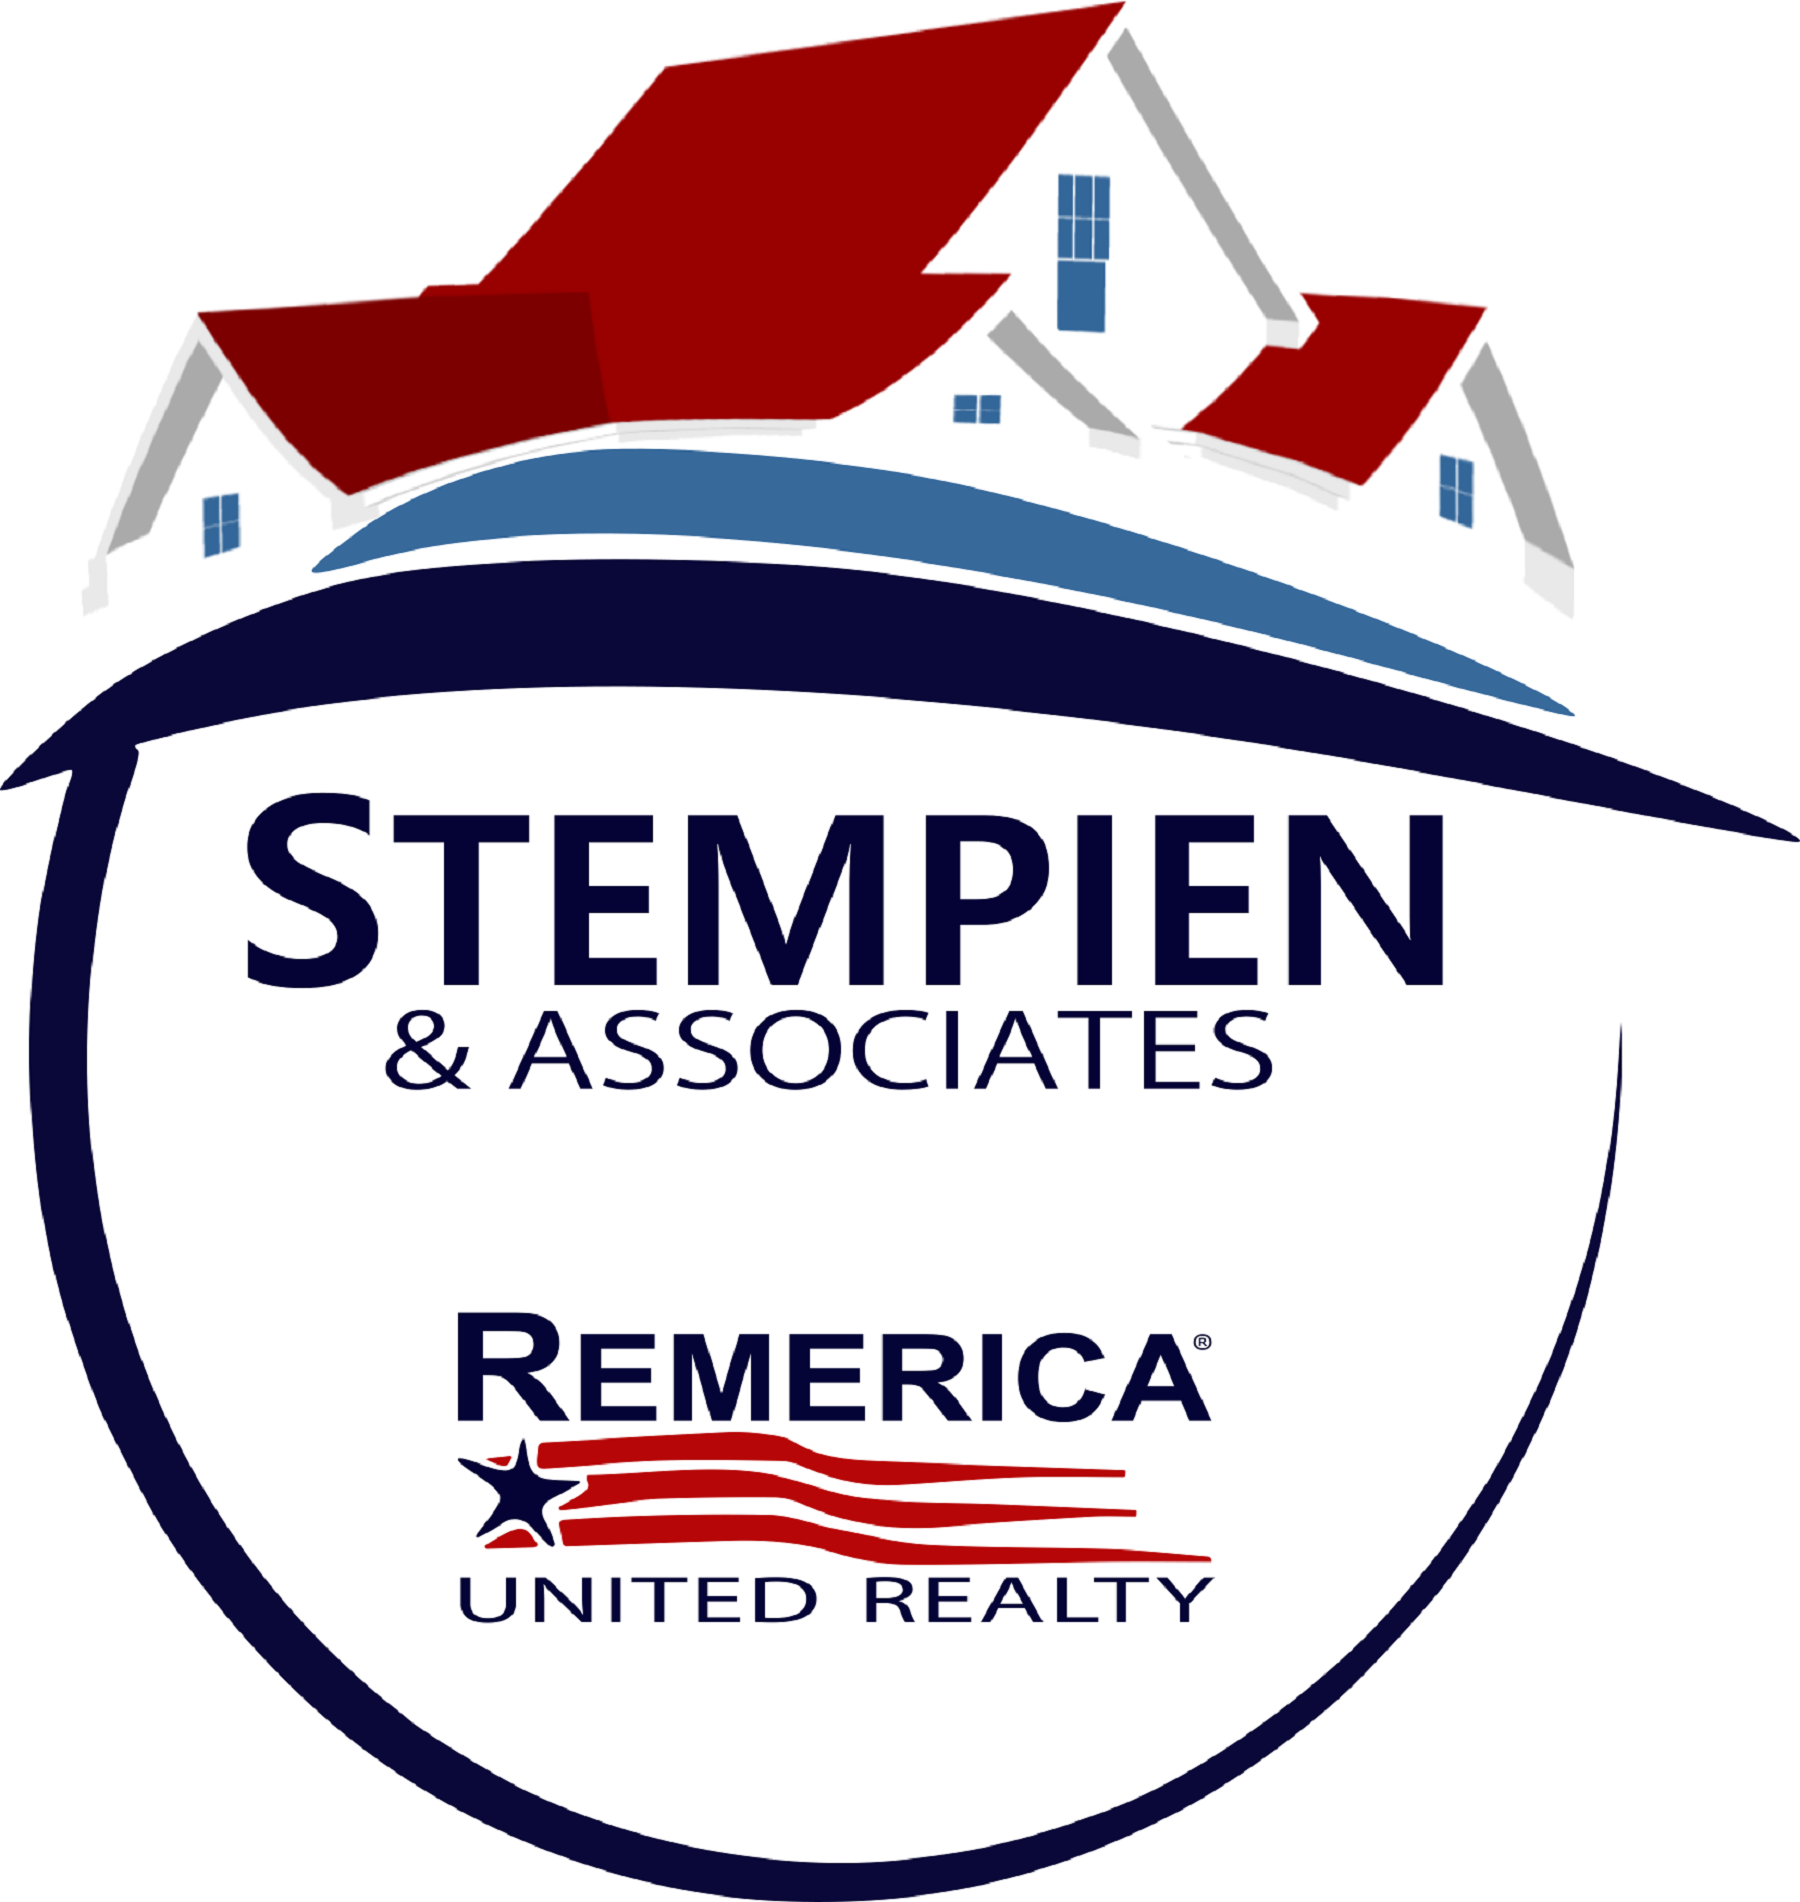 Stempien & Associates with Remerica United Realty